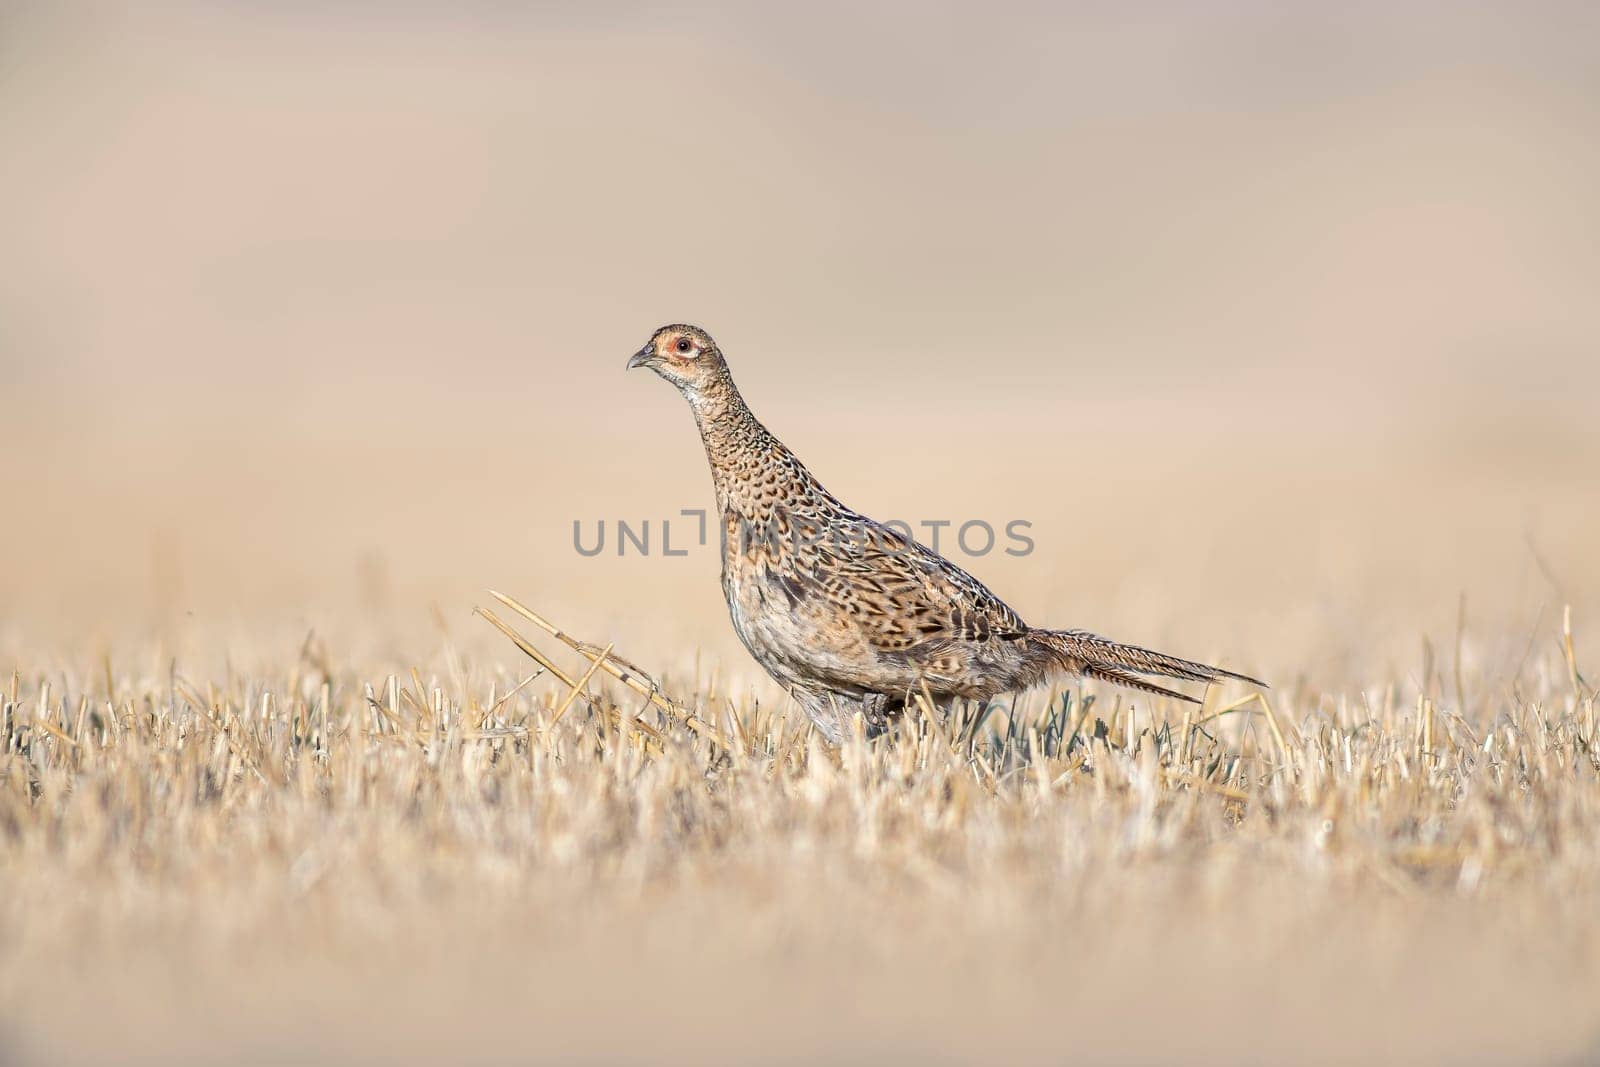 pheasant hen in a harvested wheat field in summer